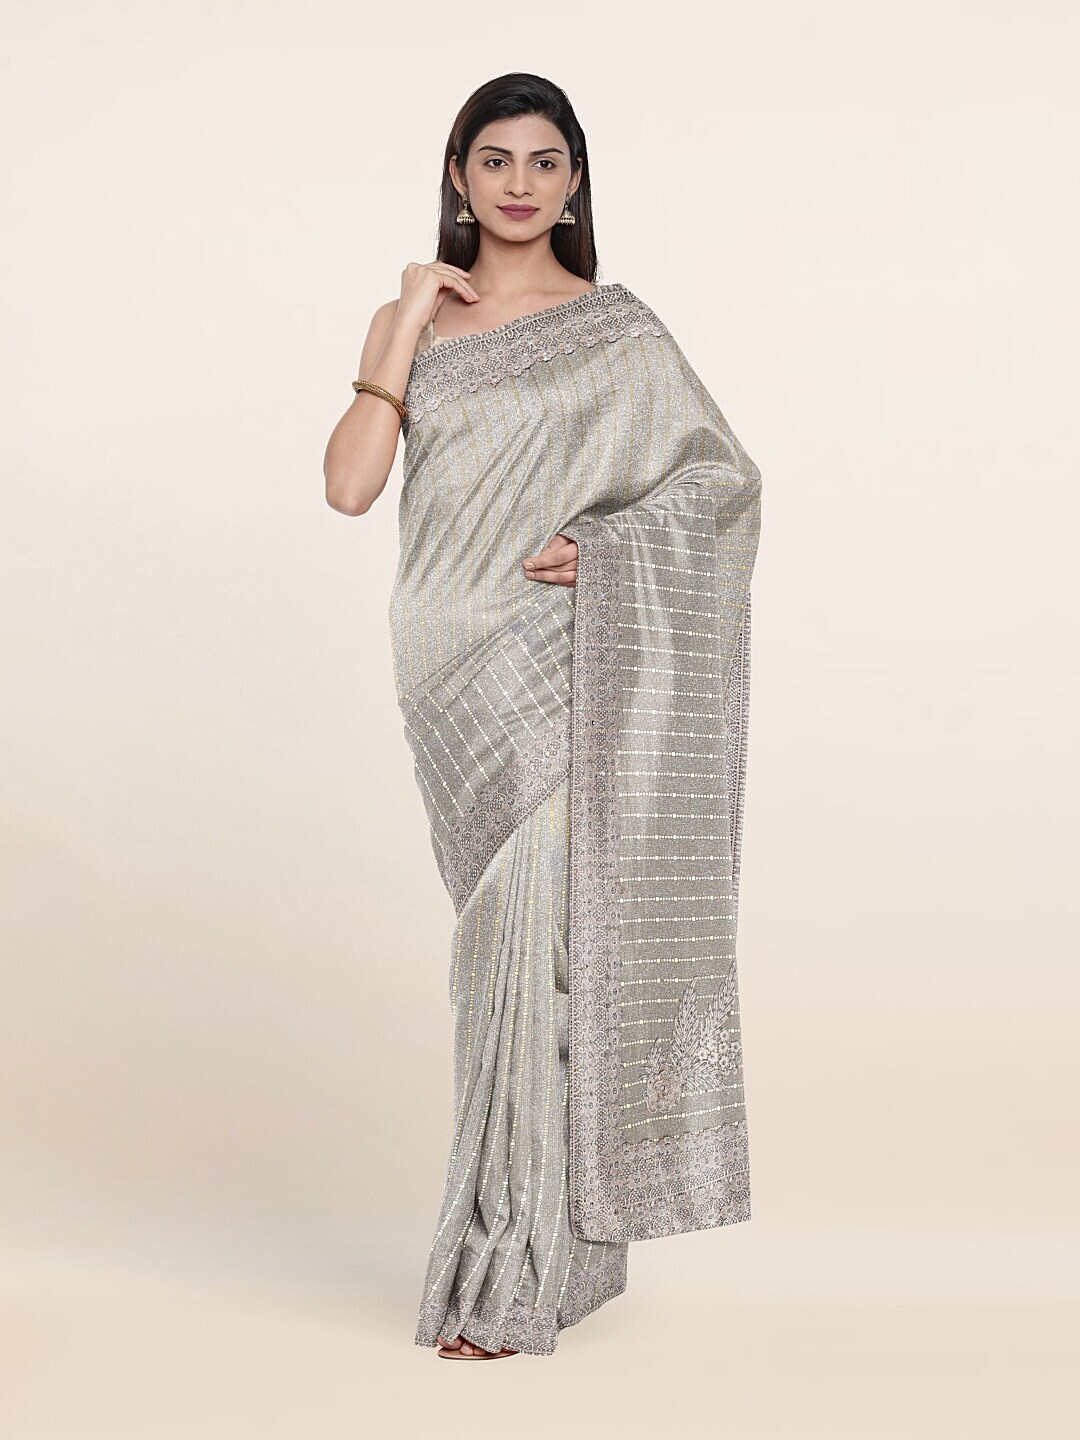 Pothys Silver-Toned Striped Beads and Stones Saree Price in India